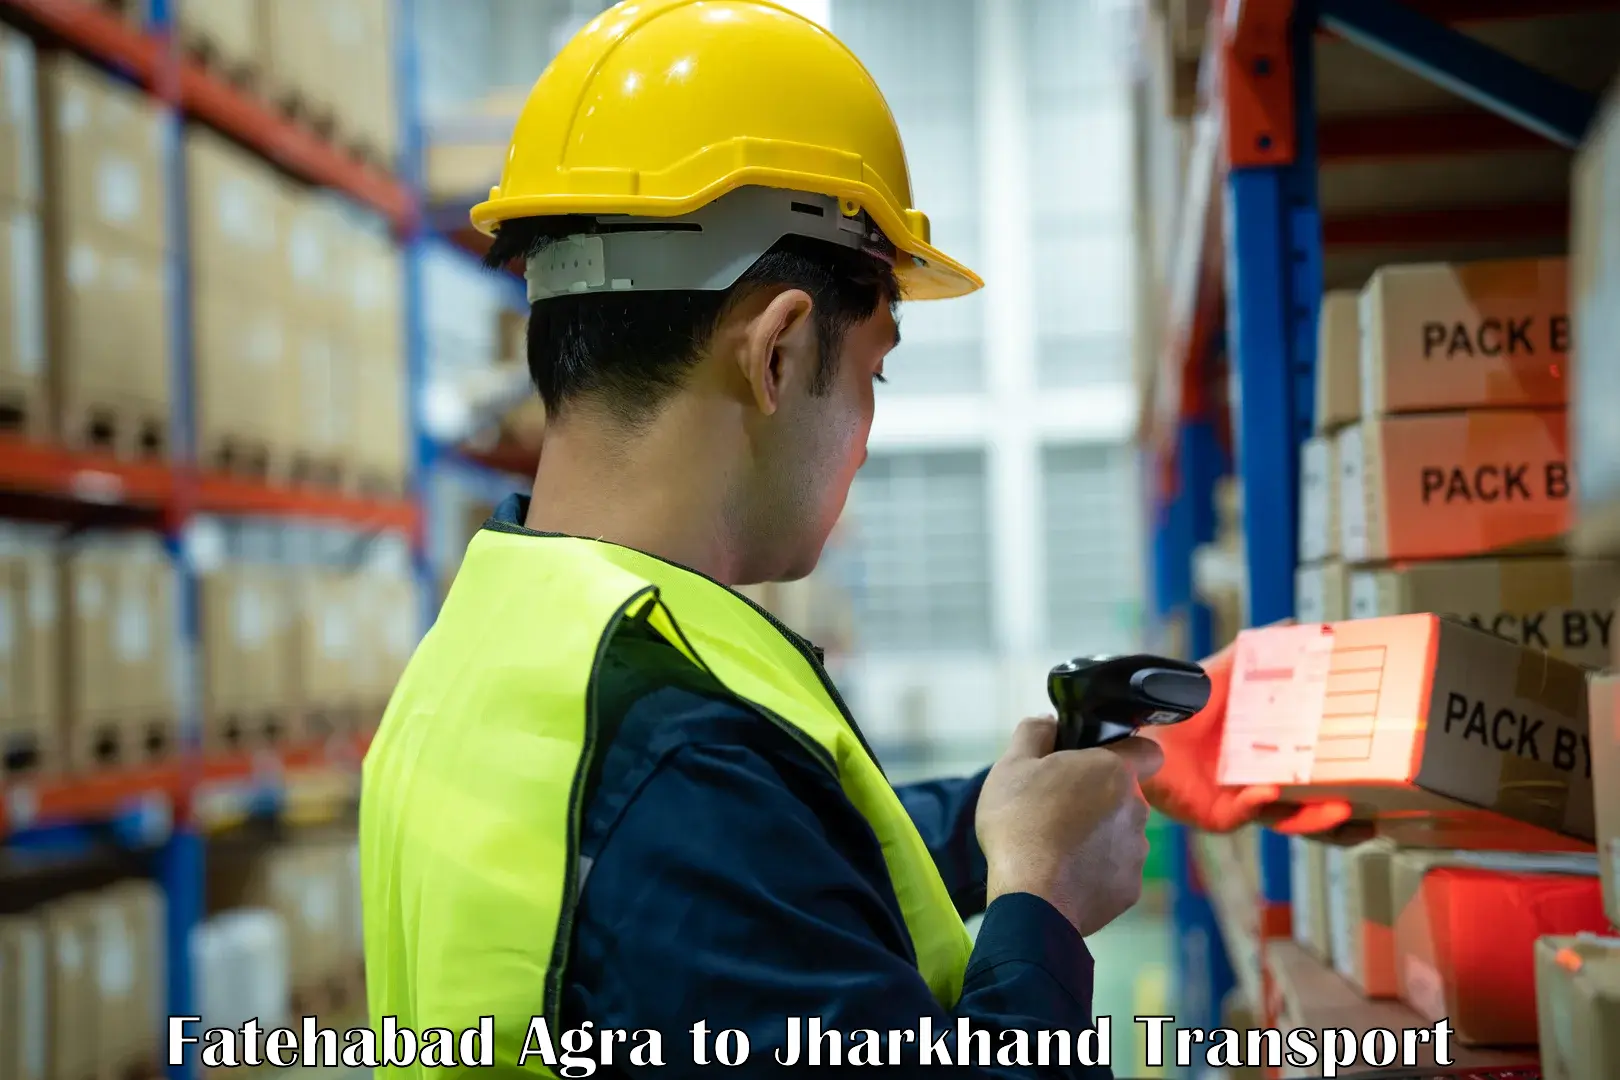 Air freight transport services in Fatehabad Agra to Bokaro